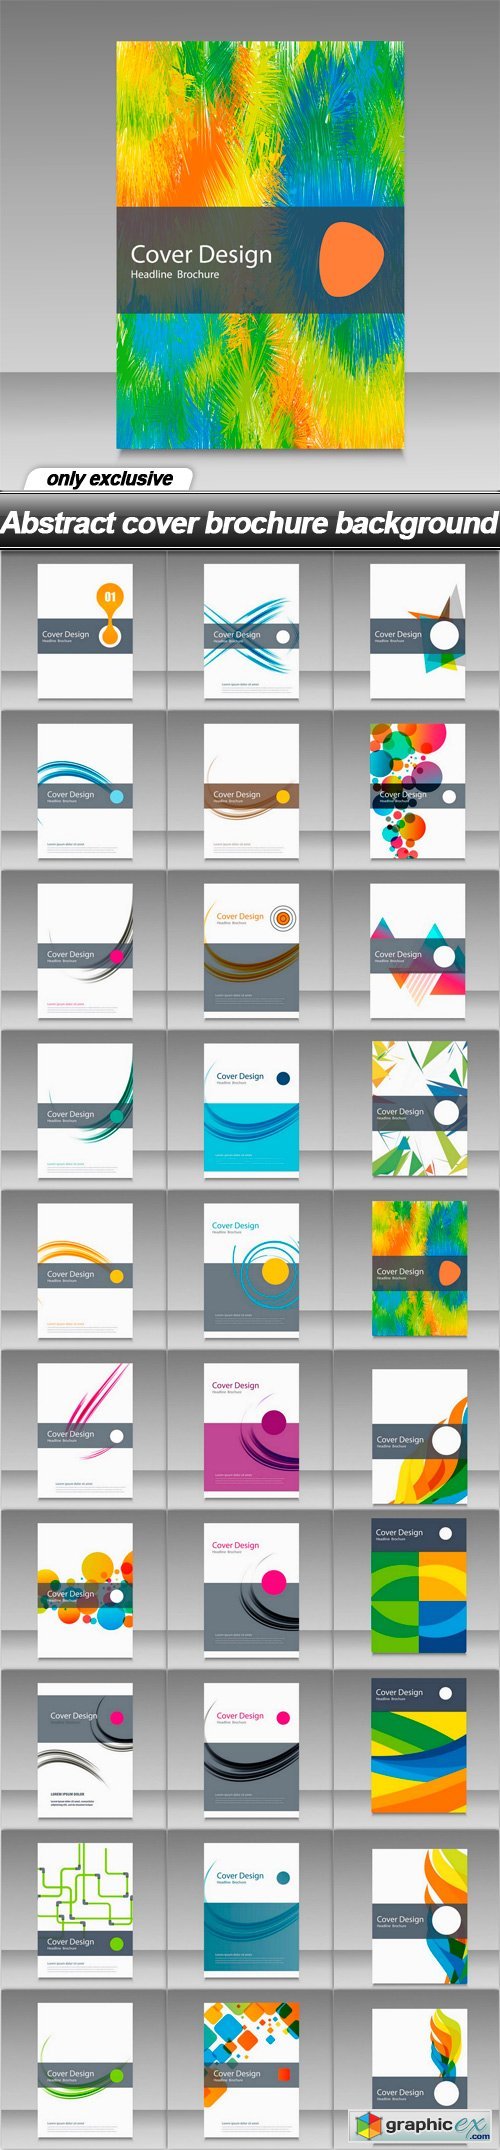 Abstract cover brochure background - 30 EPS